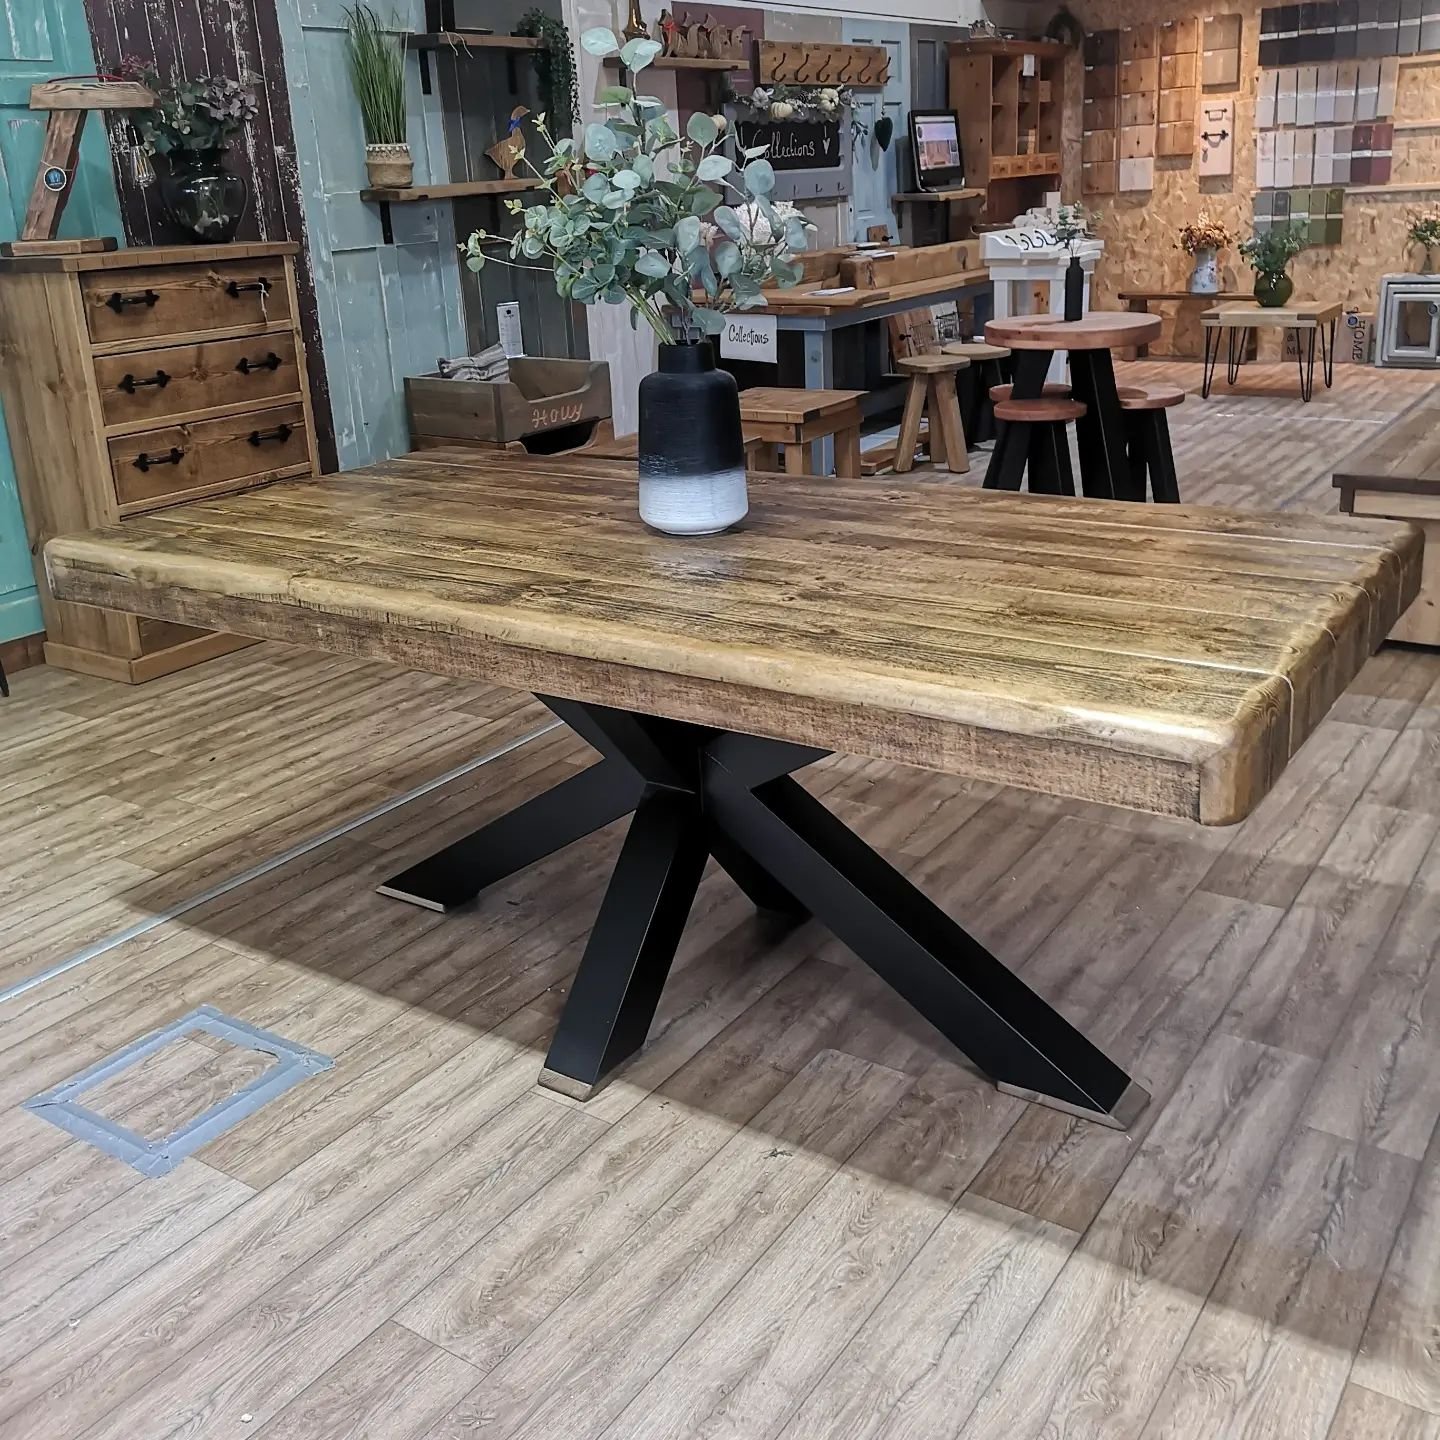 The Franklin 2m x 1m in Jacobean available now.

#diningroom #diningtable #dineinstyle #dineathome #modernrustic #industrialdesign #metalfurniture #interiors #homedecoration #rusticdecor #homeinspo #homelove #homesweethome #chunky #instahomewales #in